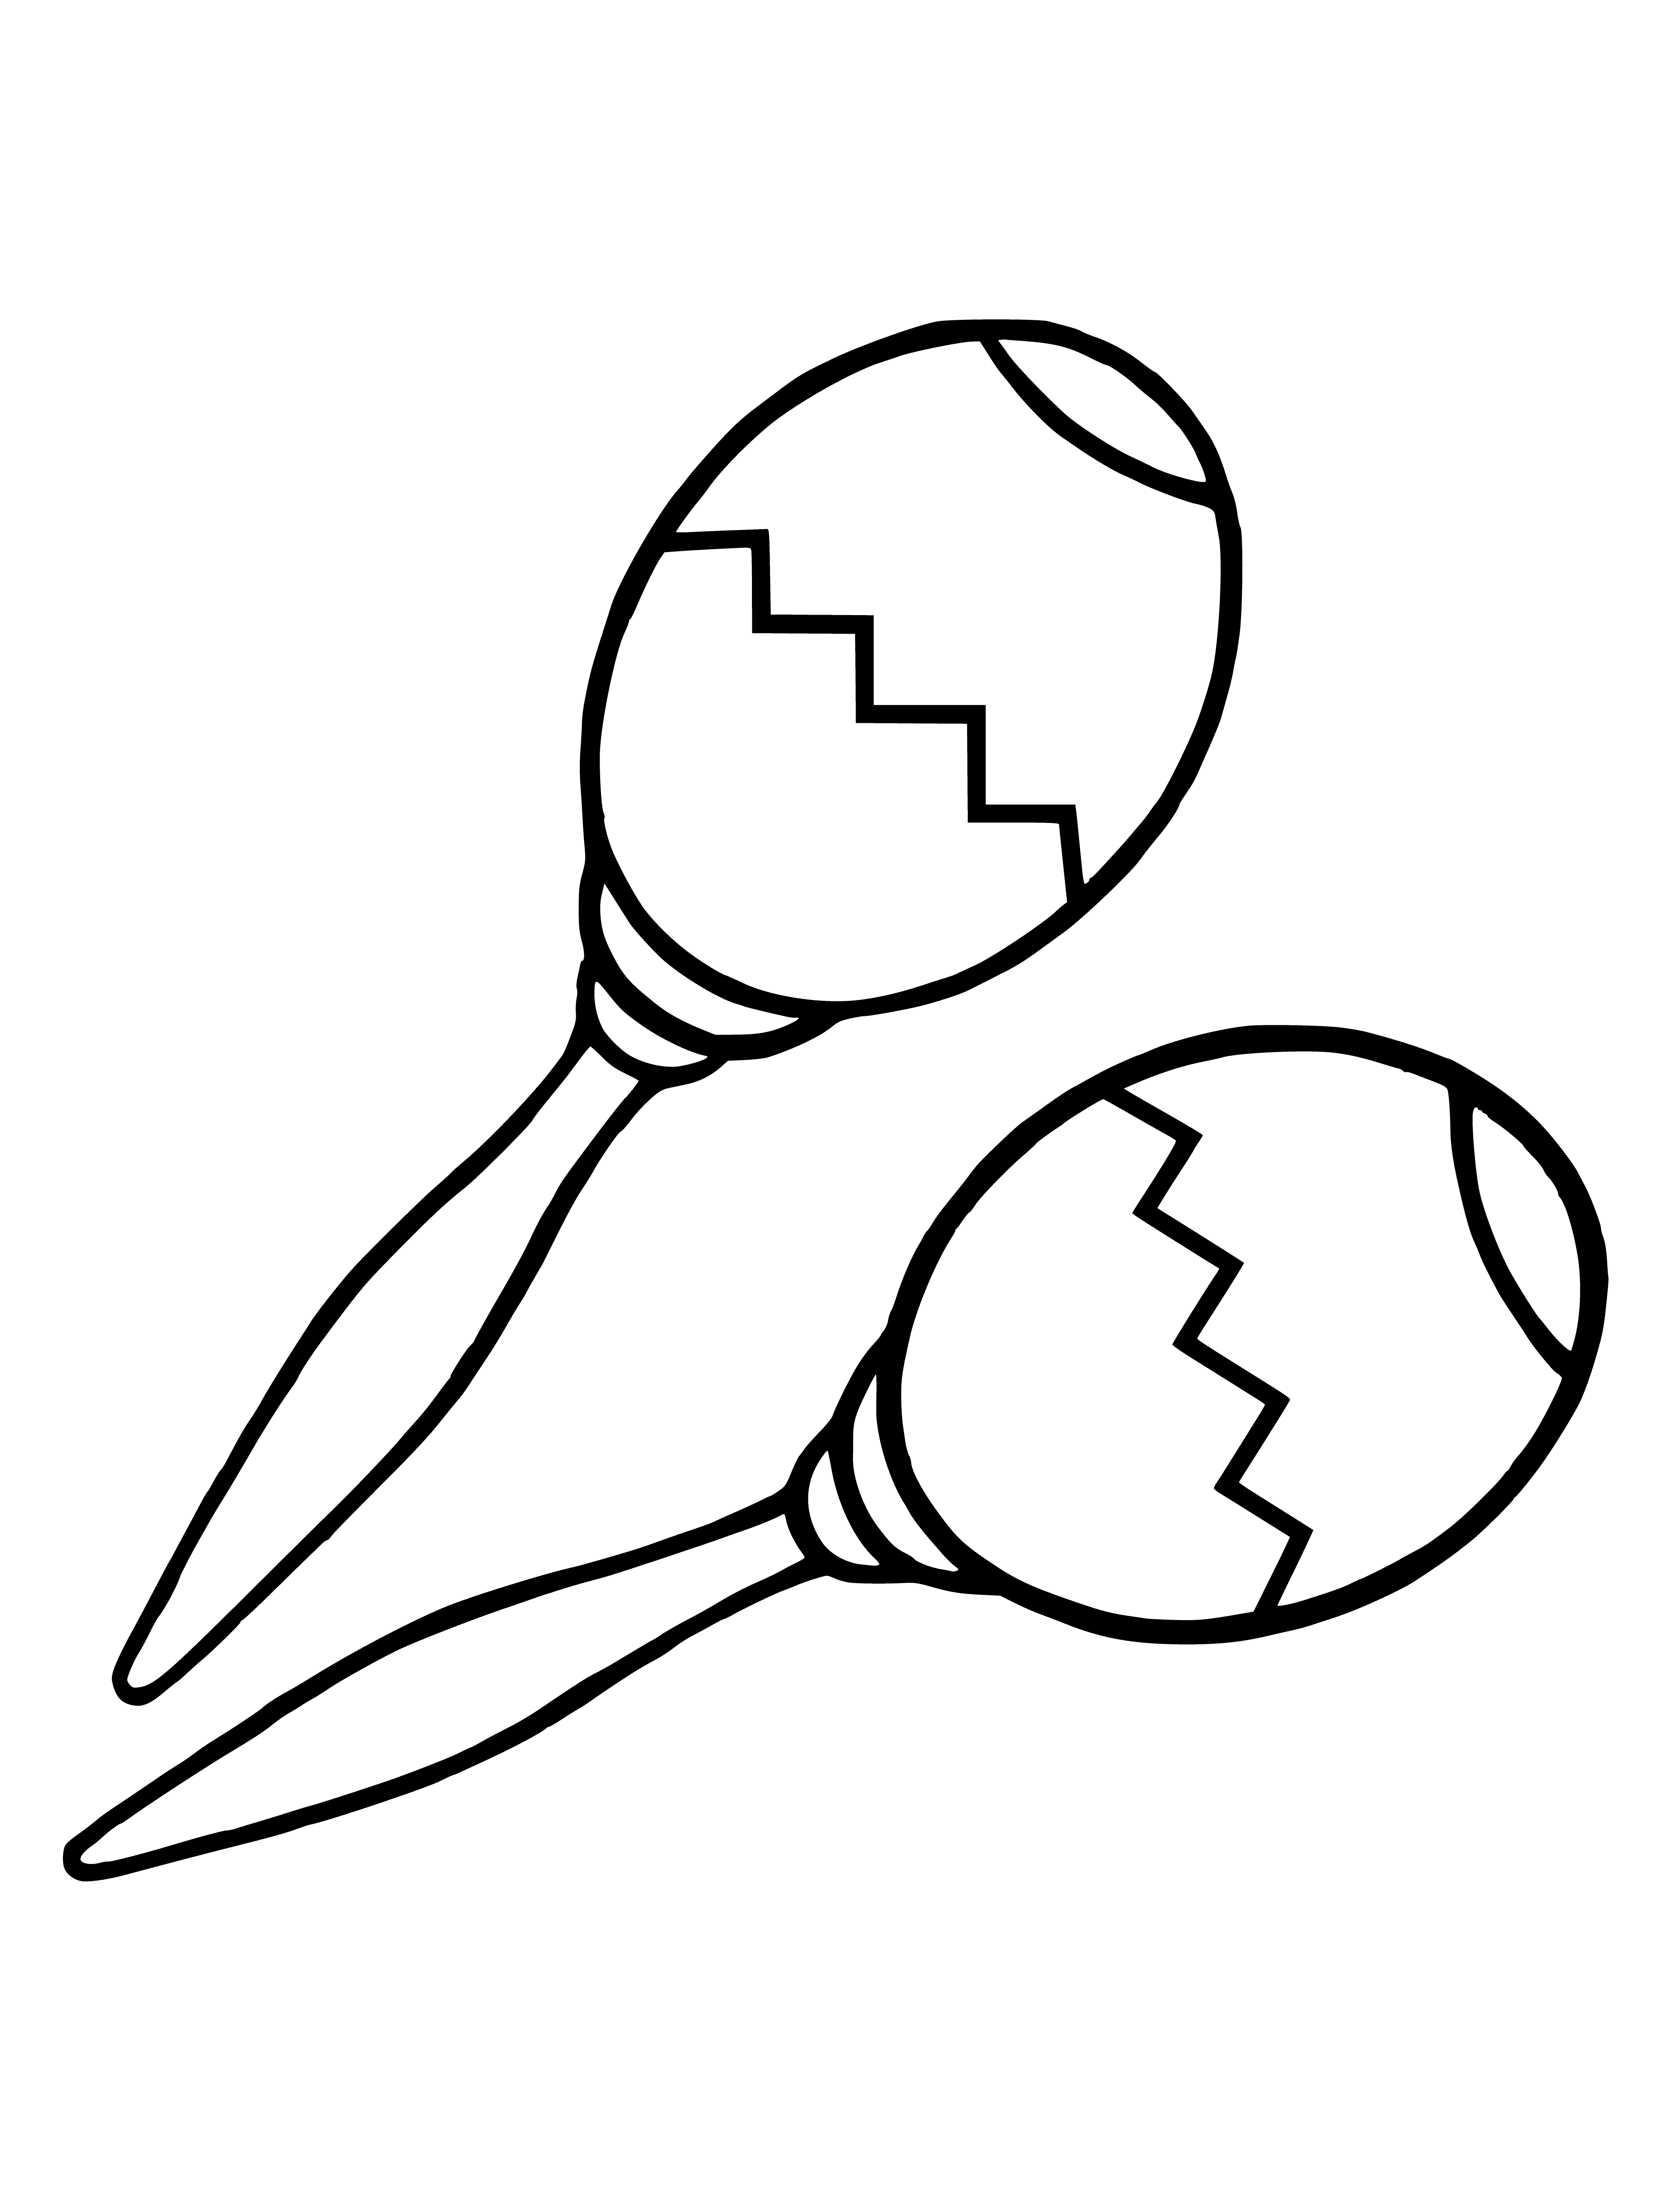 coloring page: Two brown maracas with long handles and open tops w/ ball inside -- perfect for coloring! #kidsactivities #music #coloringpages